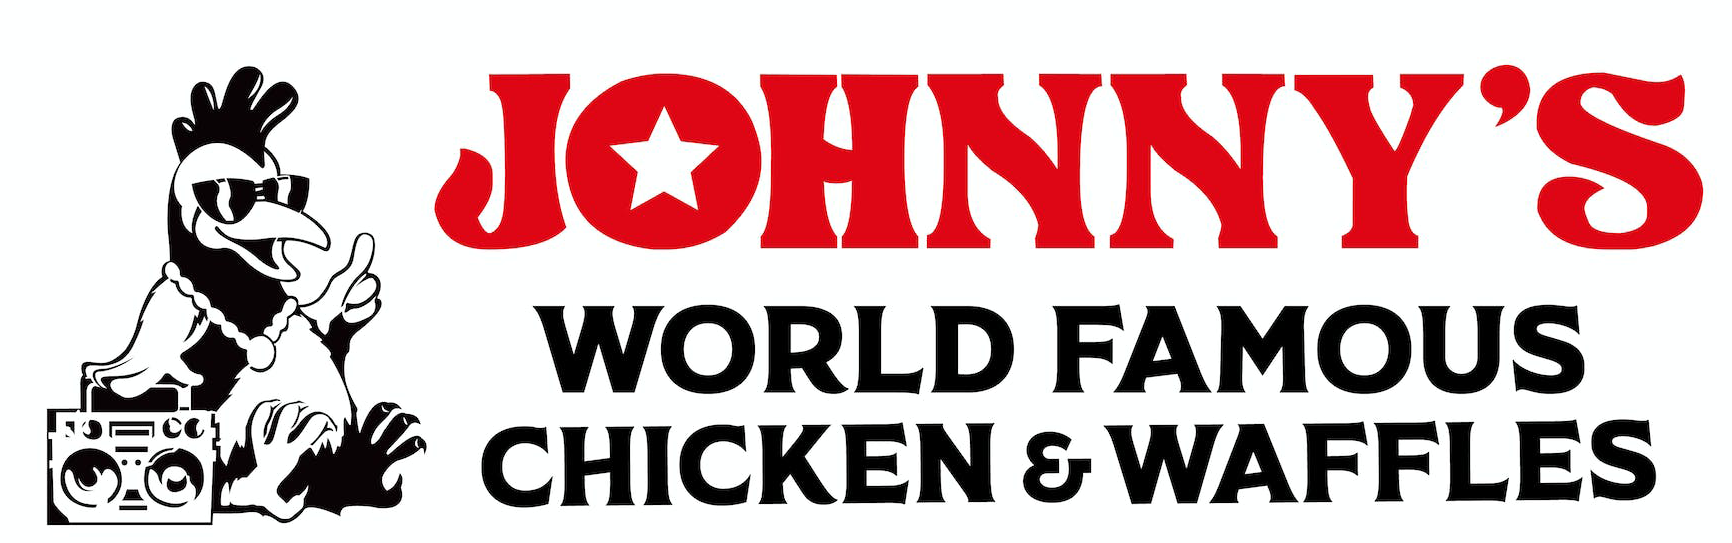 Johnny's Chicken and Waffles Home